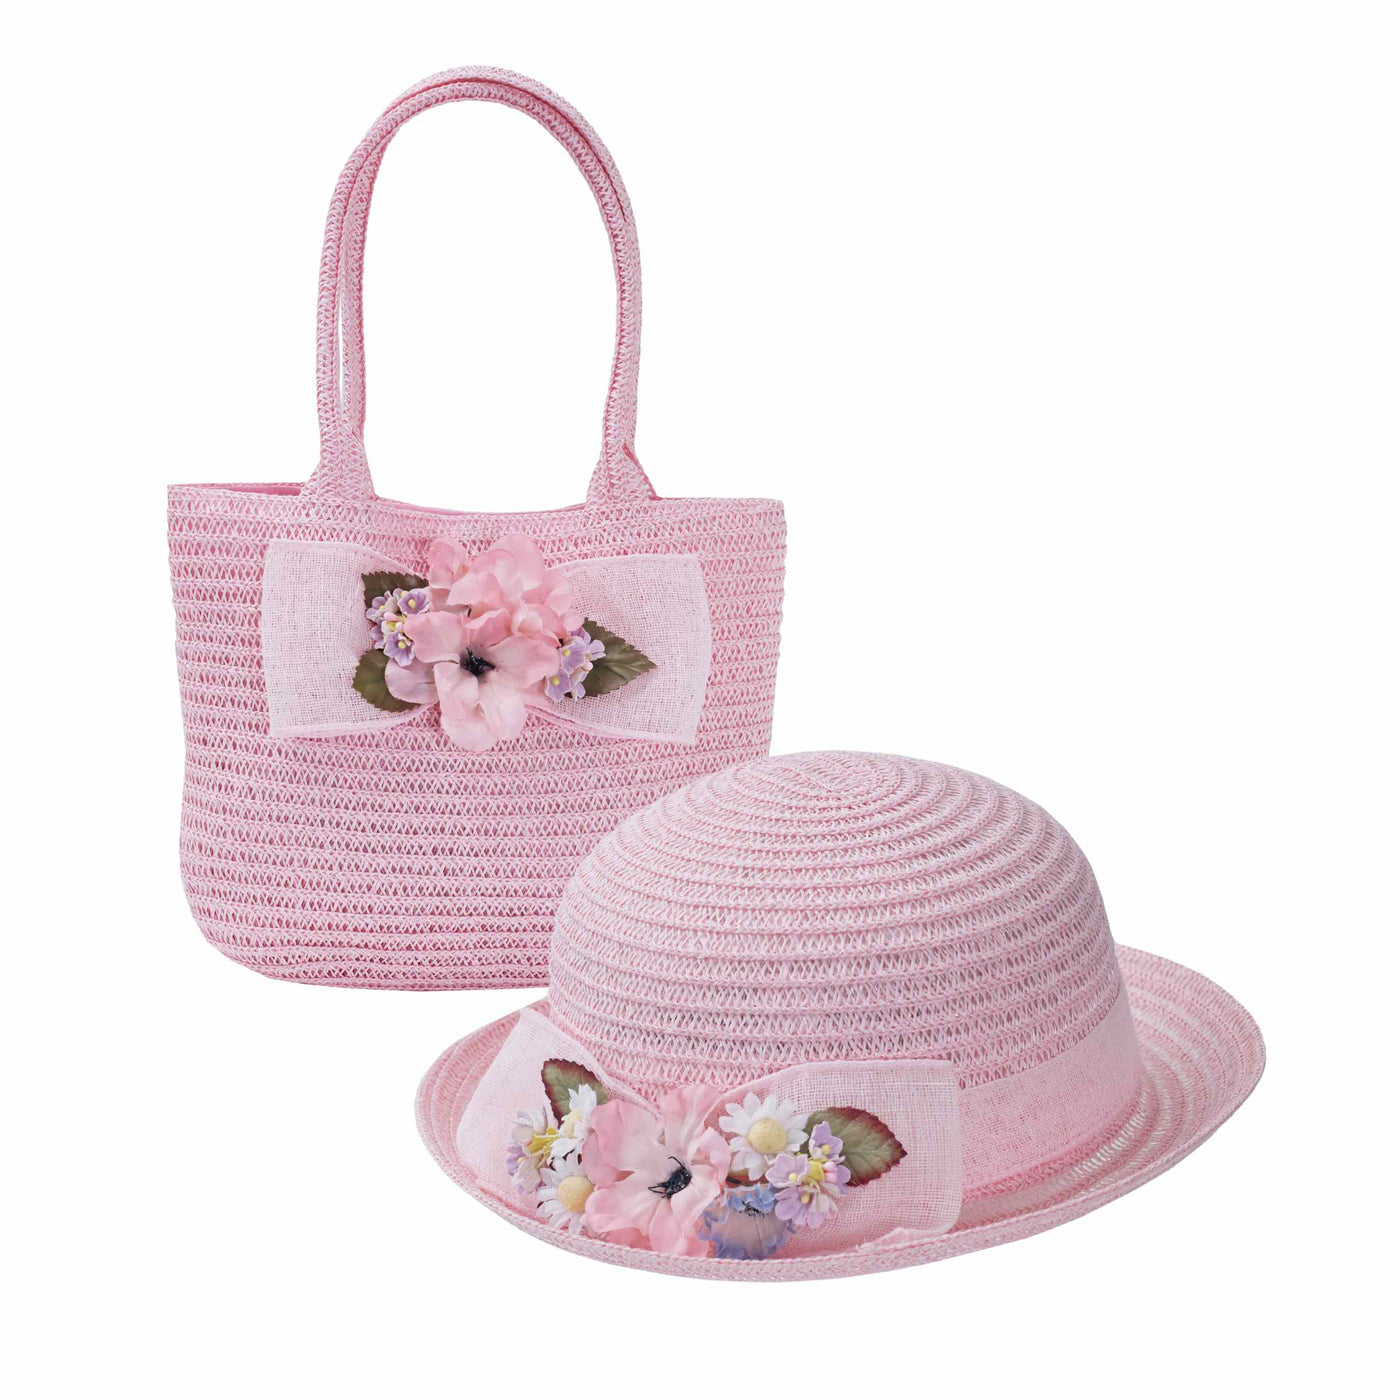 Child's Floral Hat and Purse